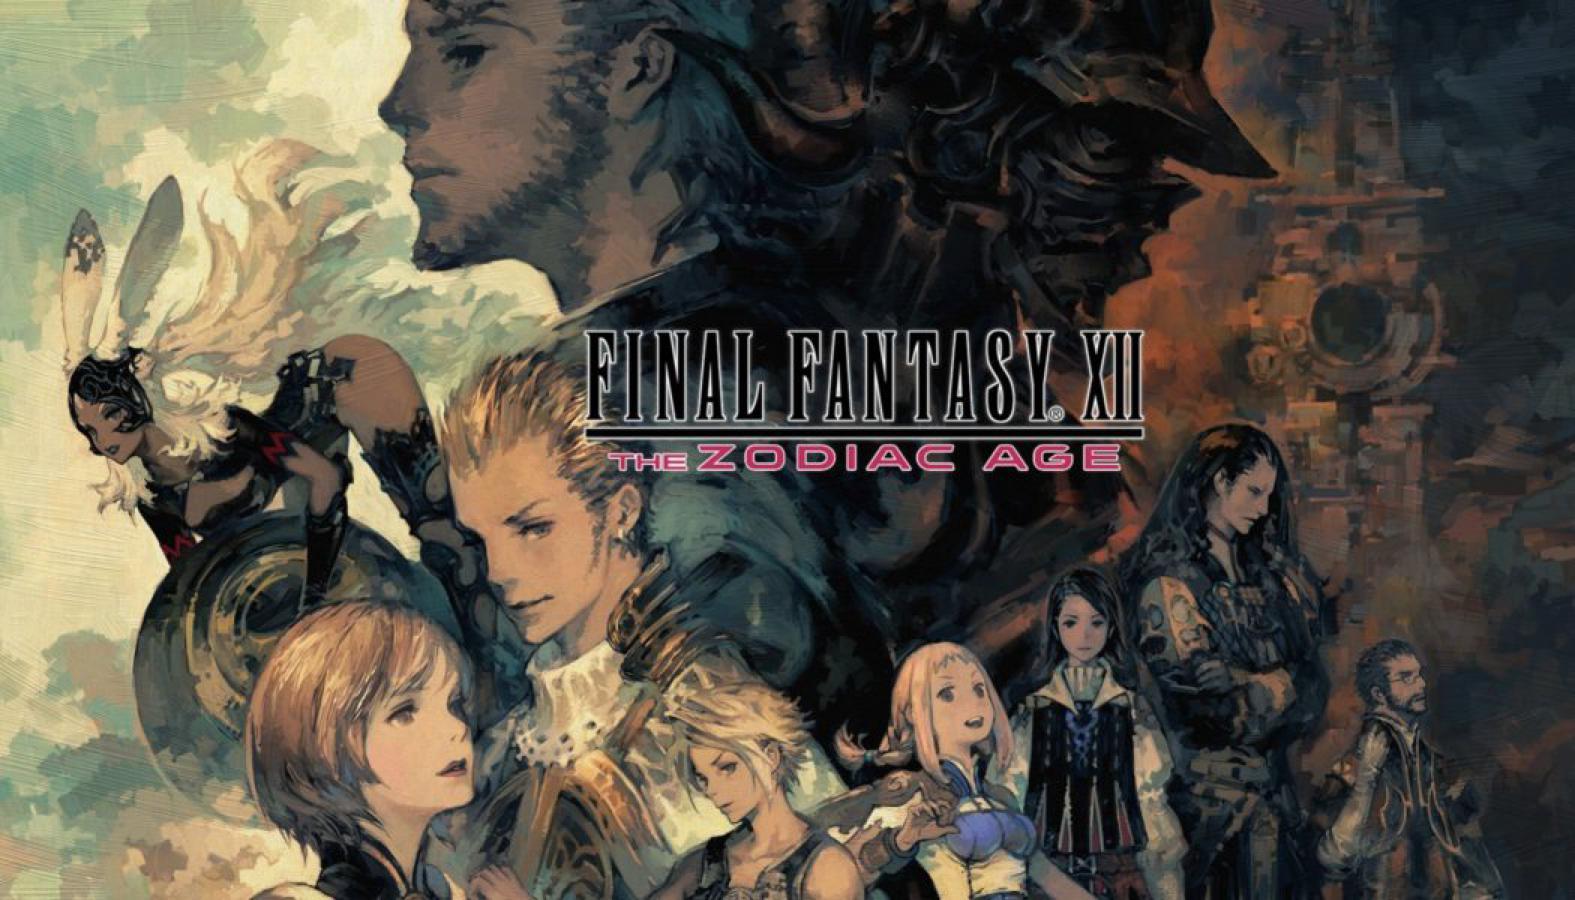 Final Fantasy Xii The Zodiac Age Wallpapers Wallpaper Cave